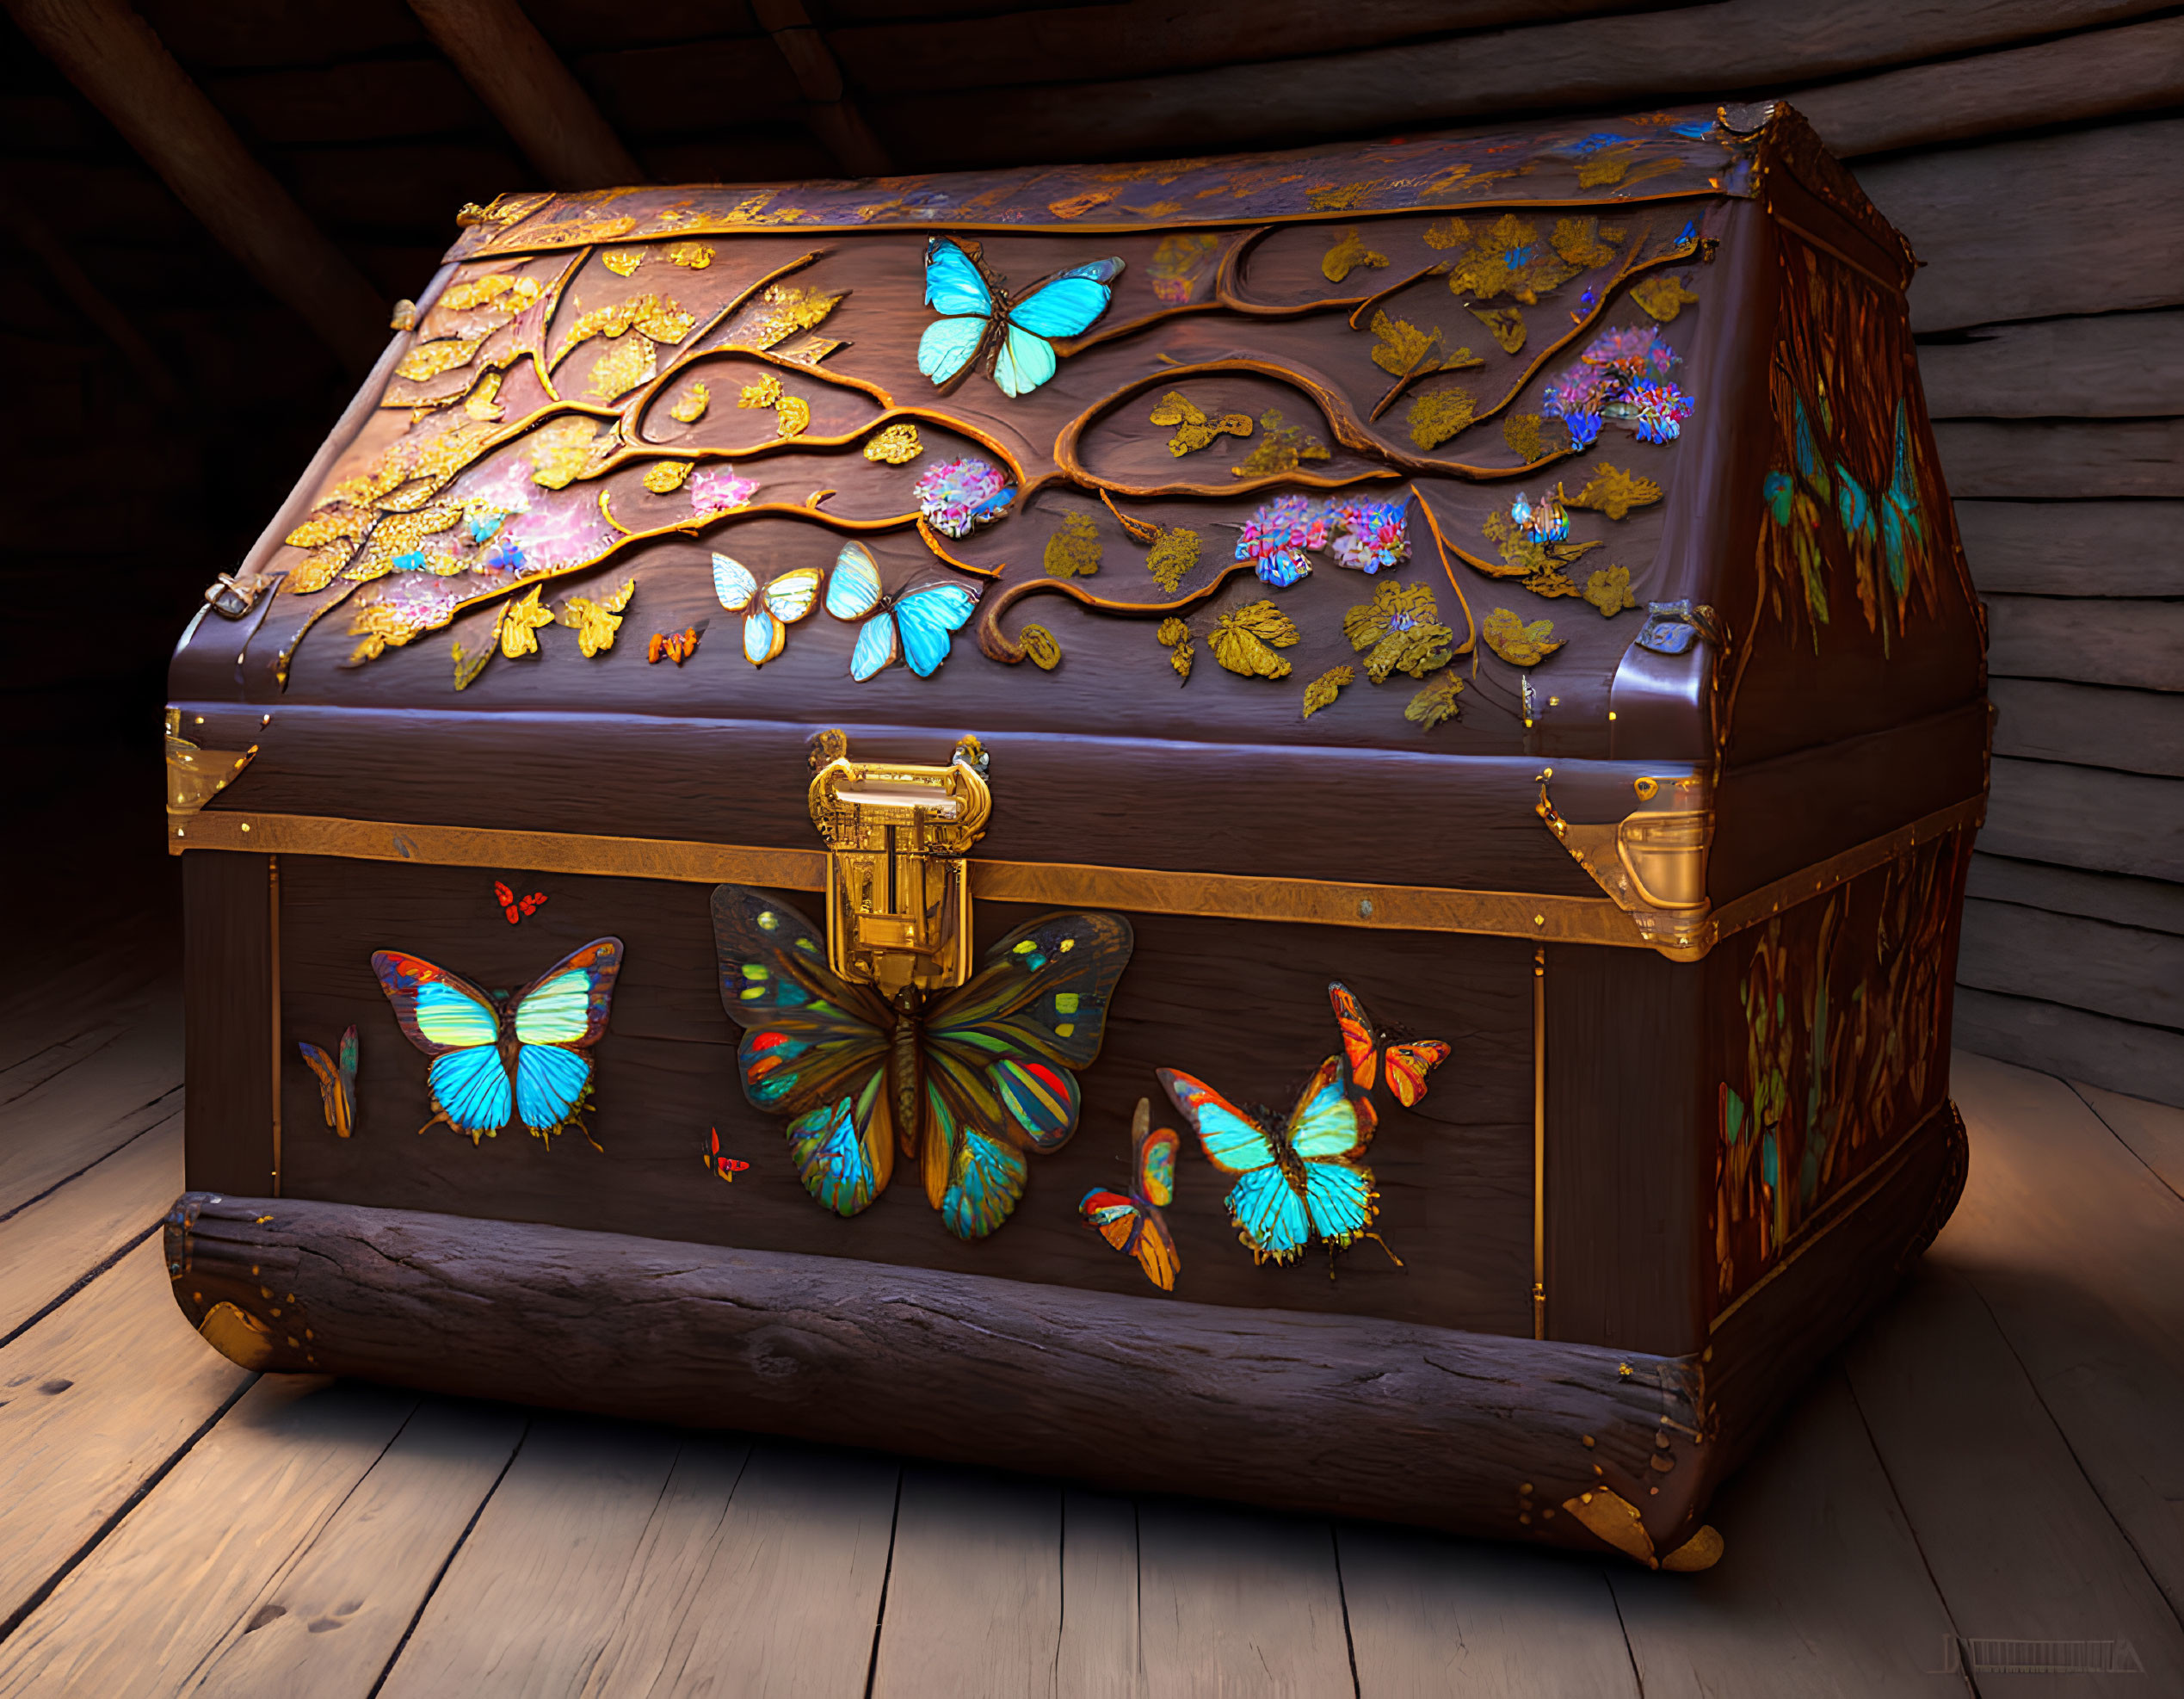 Vibrant butterfly designs on ornate wooden treasure chest in rustic setting